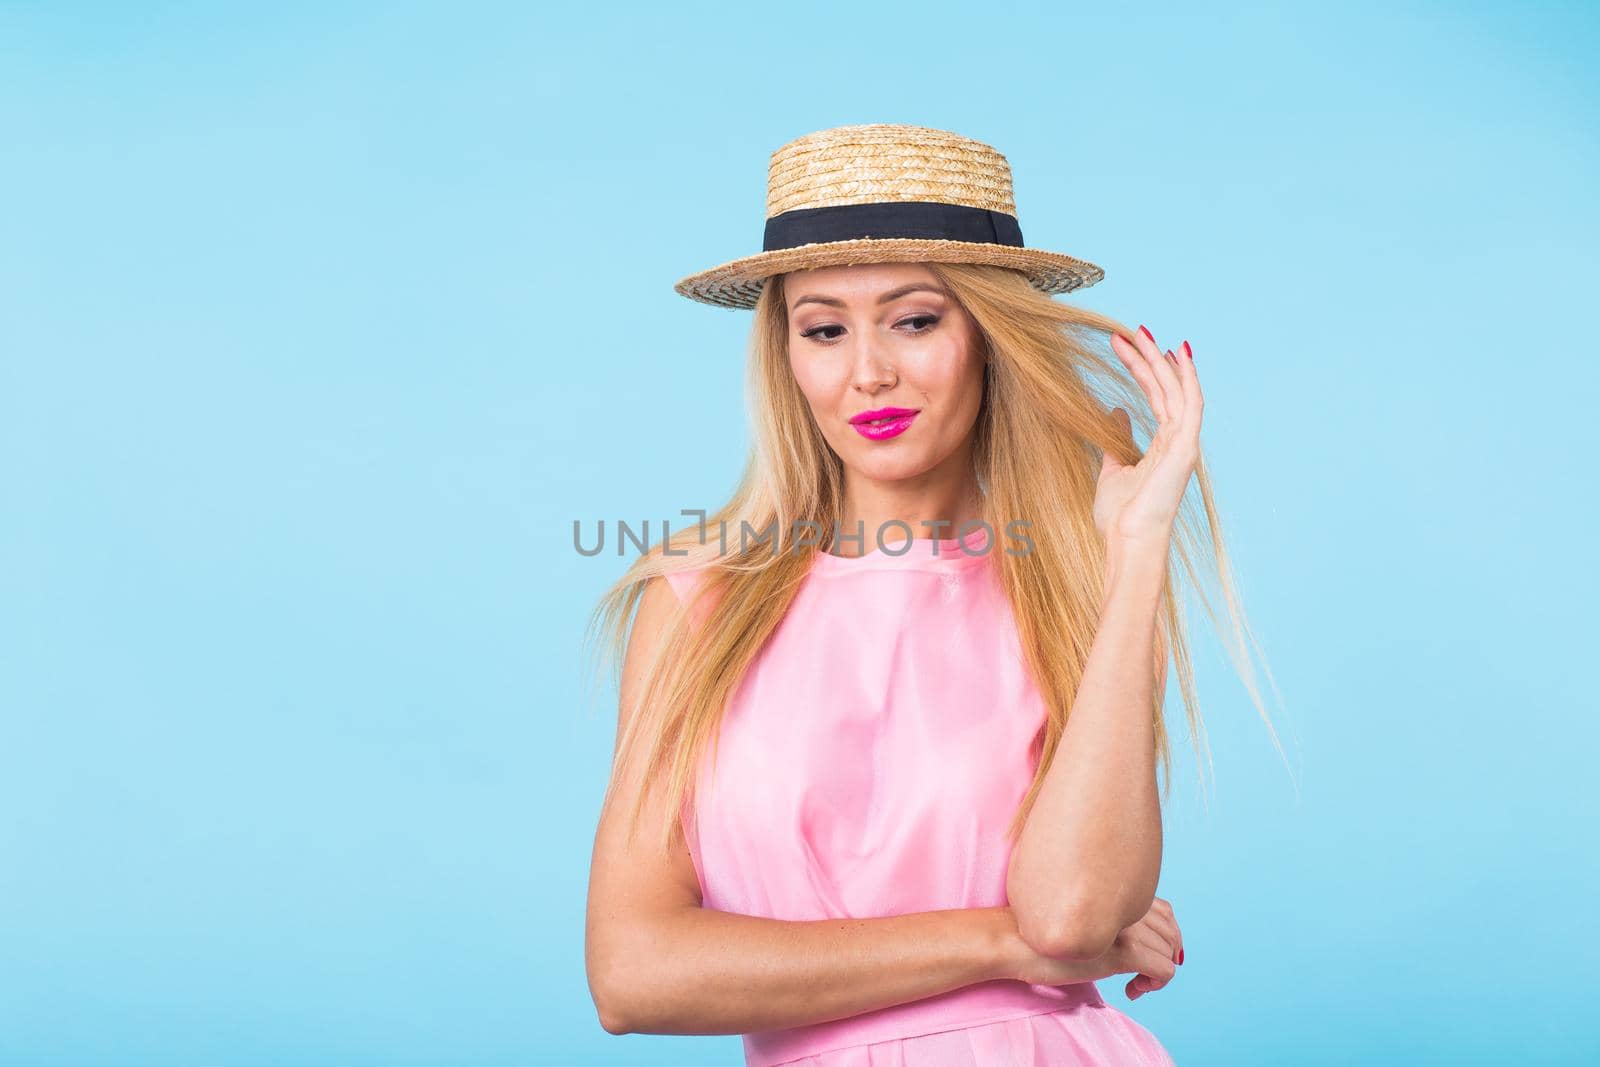 beauty fashion summer portrait of blonde woman with red lips and pink dress on blue background with copy space by Satura86